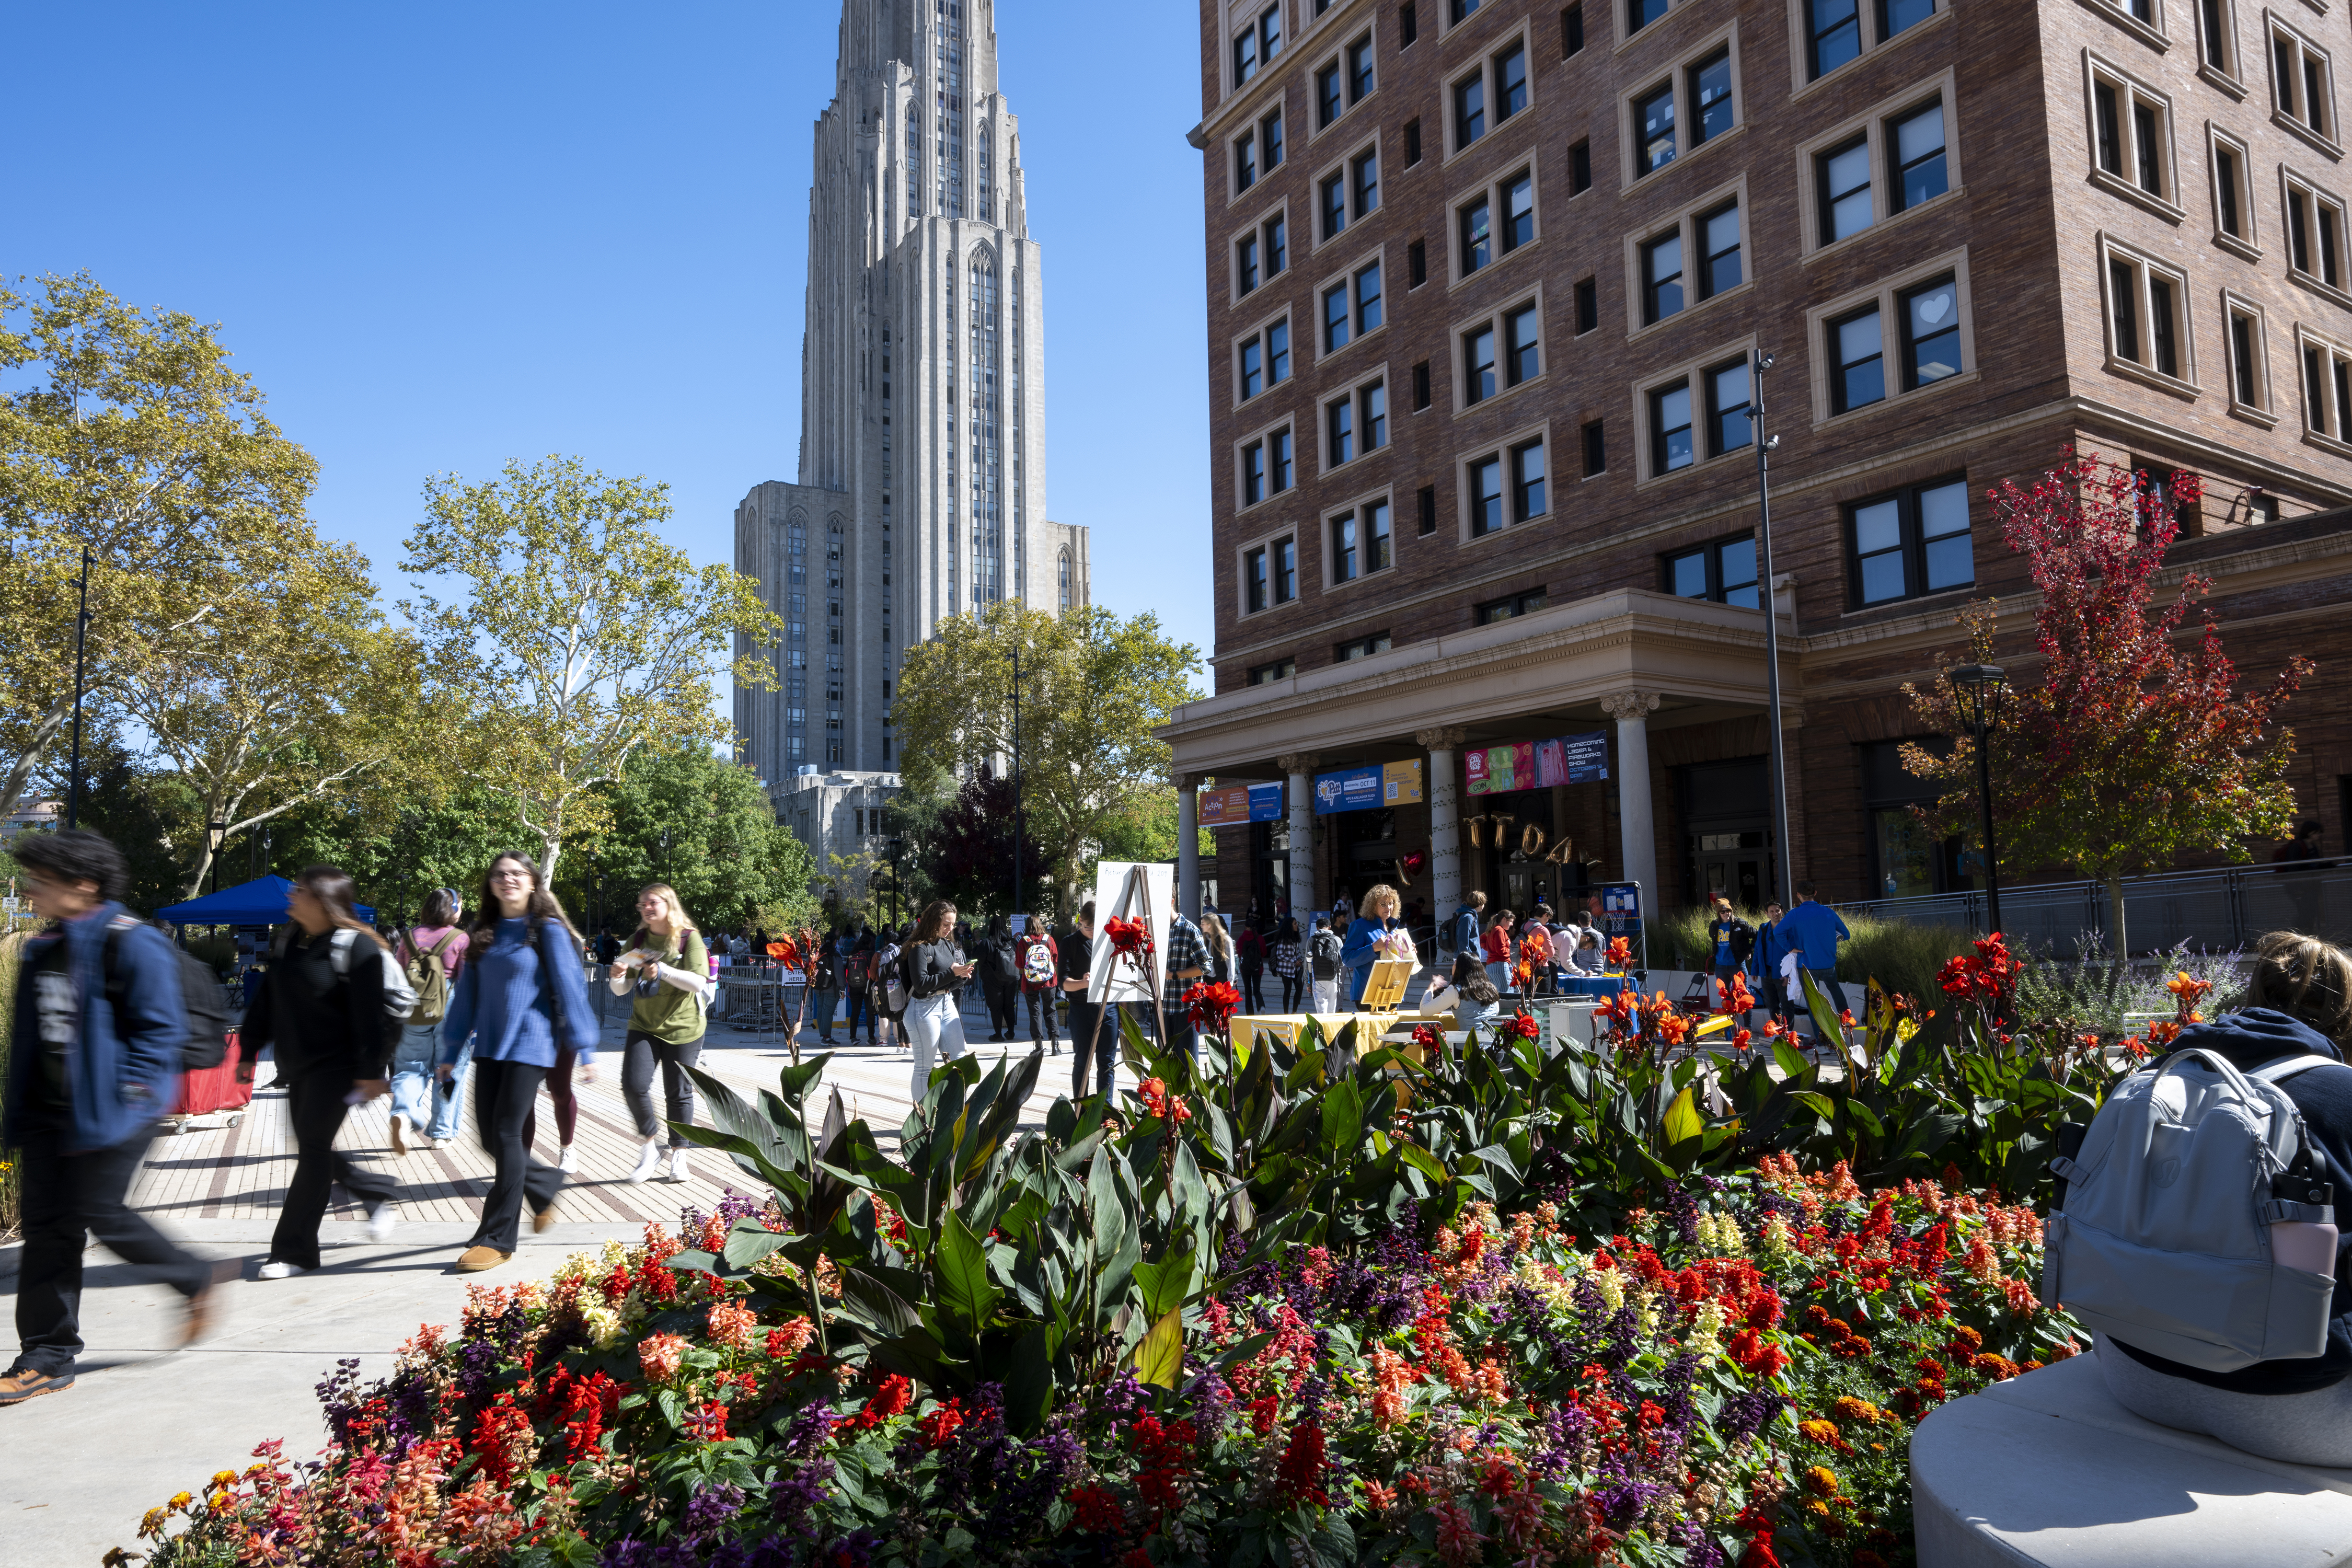 Photo of students walking around the University of Pittsburgh campus on a sunny day